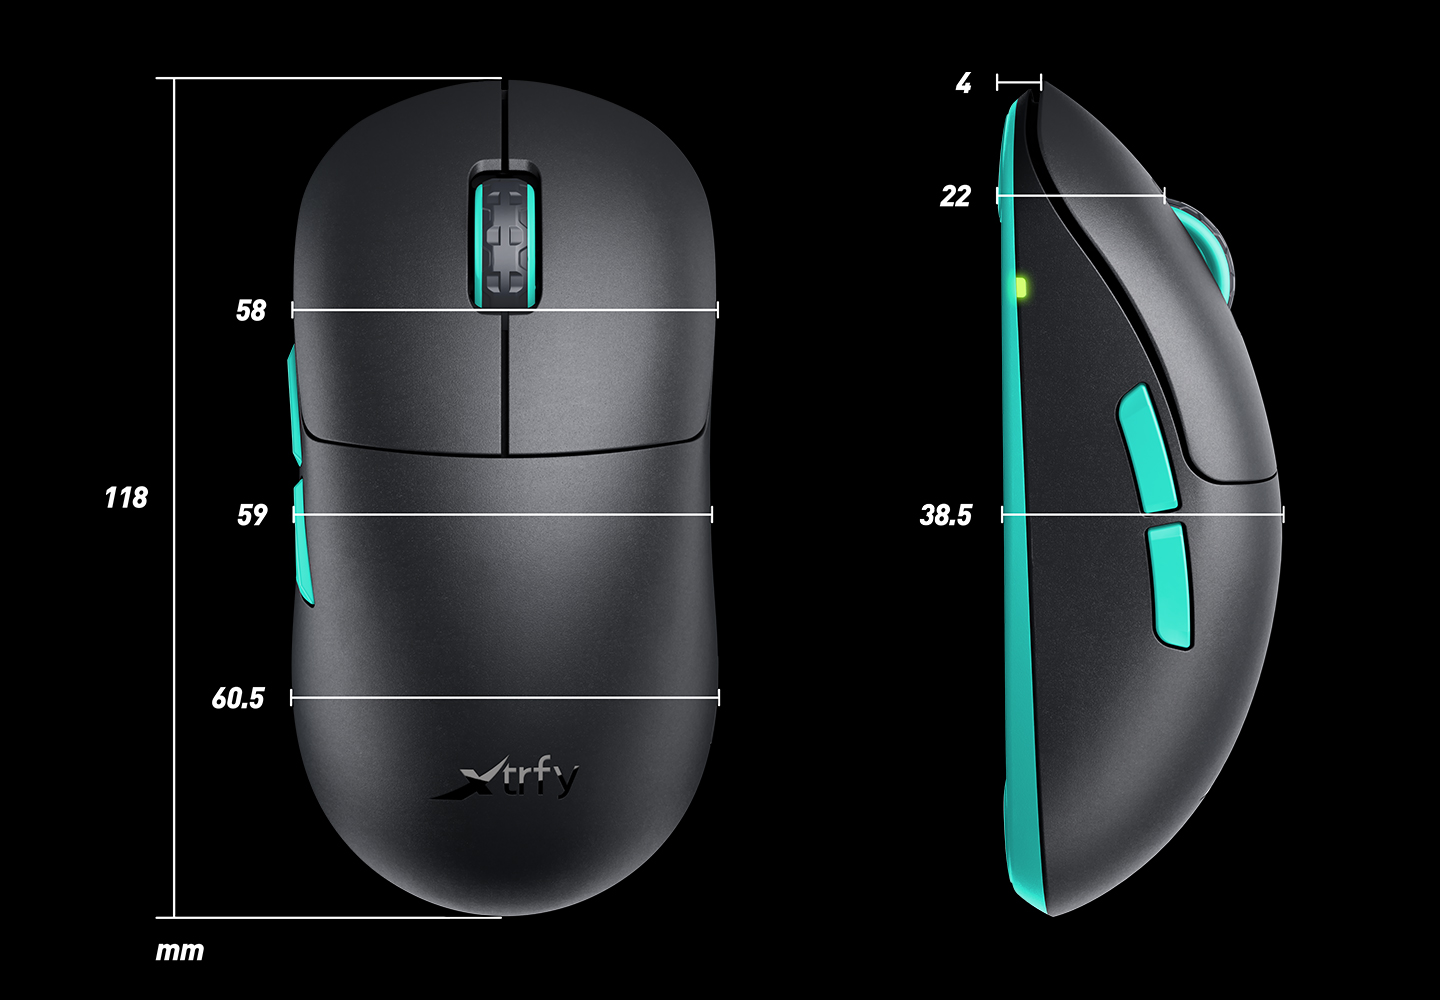 M8-WirelessBlack-Gaming-Mouse_size.jpg